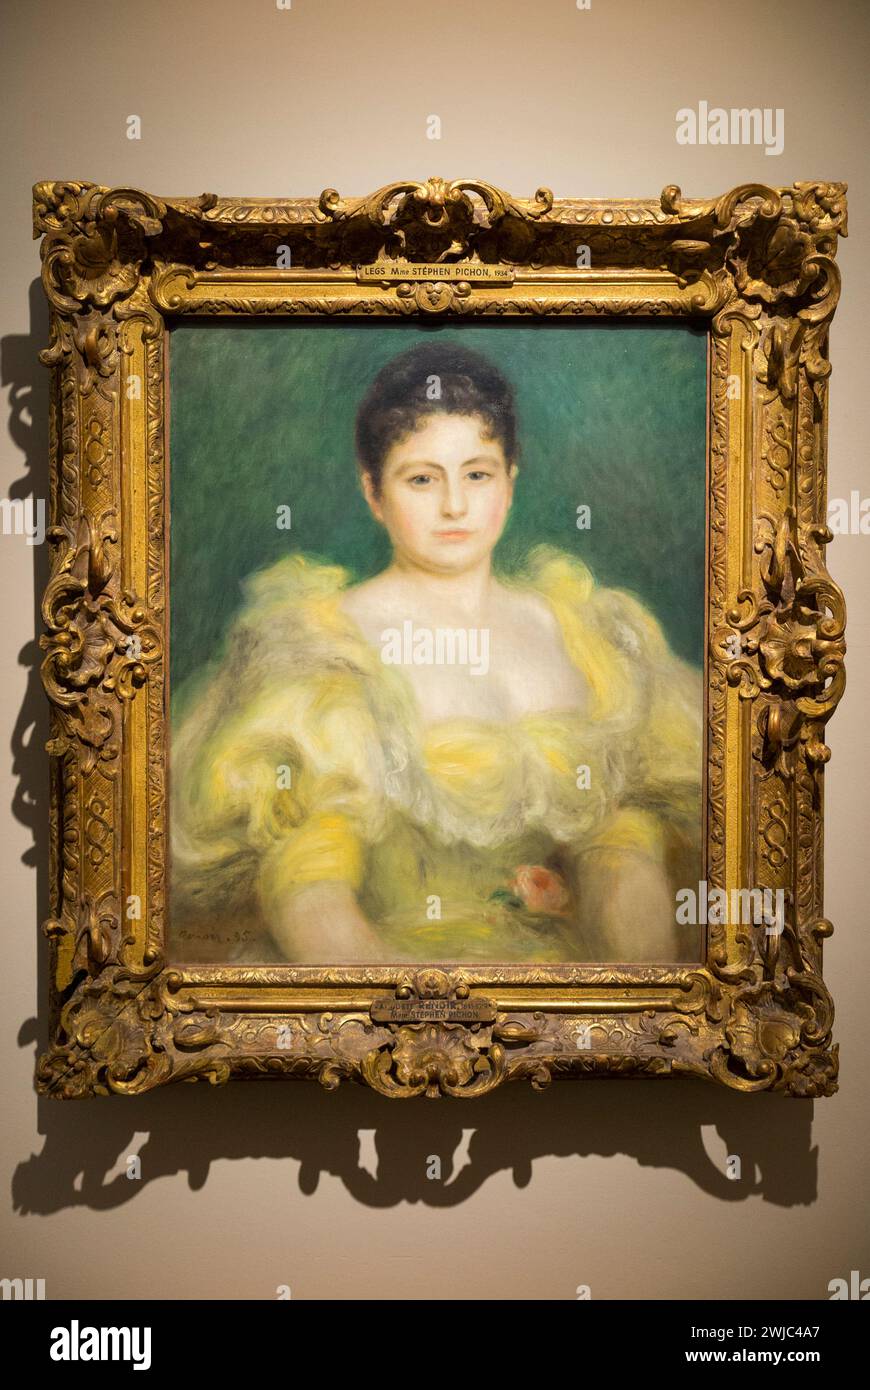 Portrait de Madame Pichon by Pierre Auguste Renoir, painting on display at his former home at Cognes-Sur-Mer. France. (135) Stock Photo